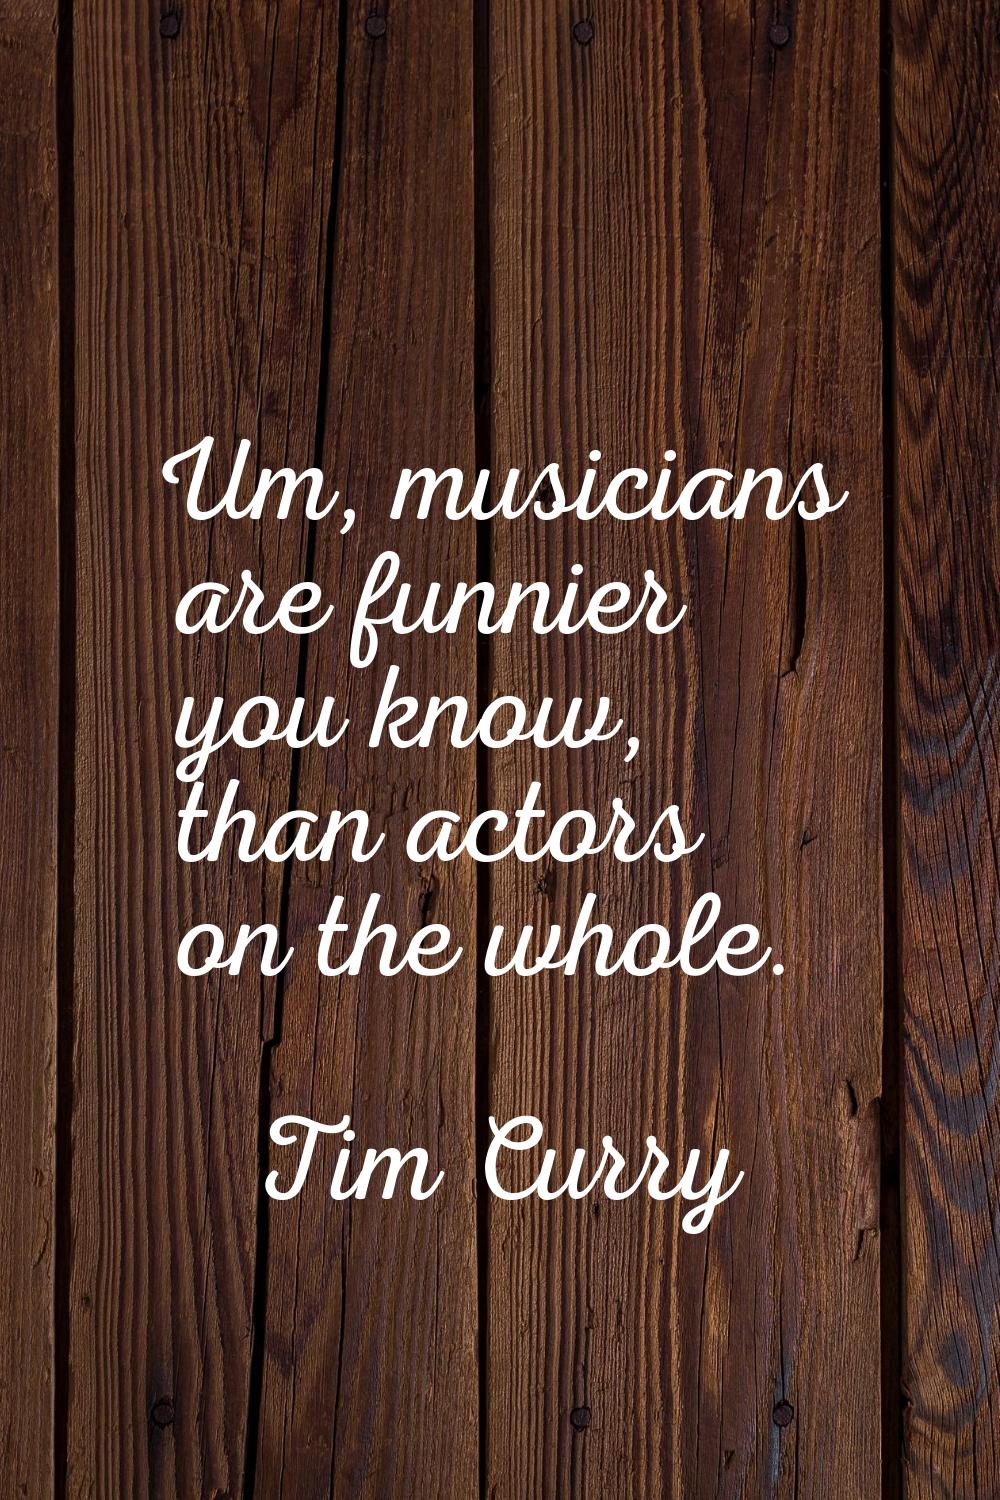 Um, musicians are funnier you know, than actors on the whole.